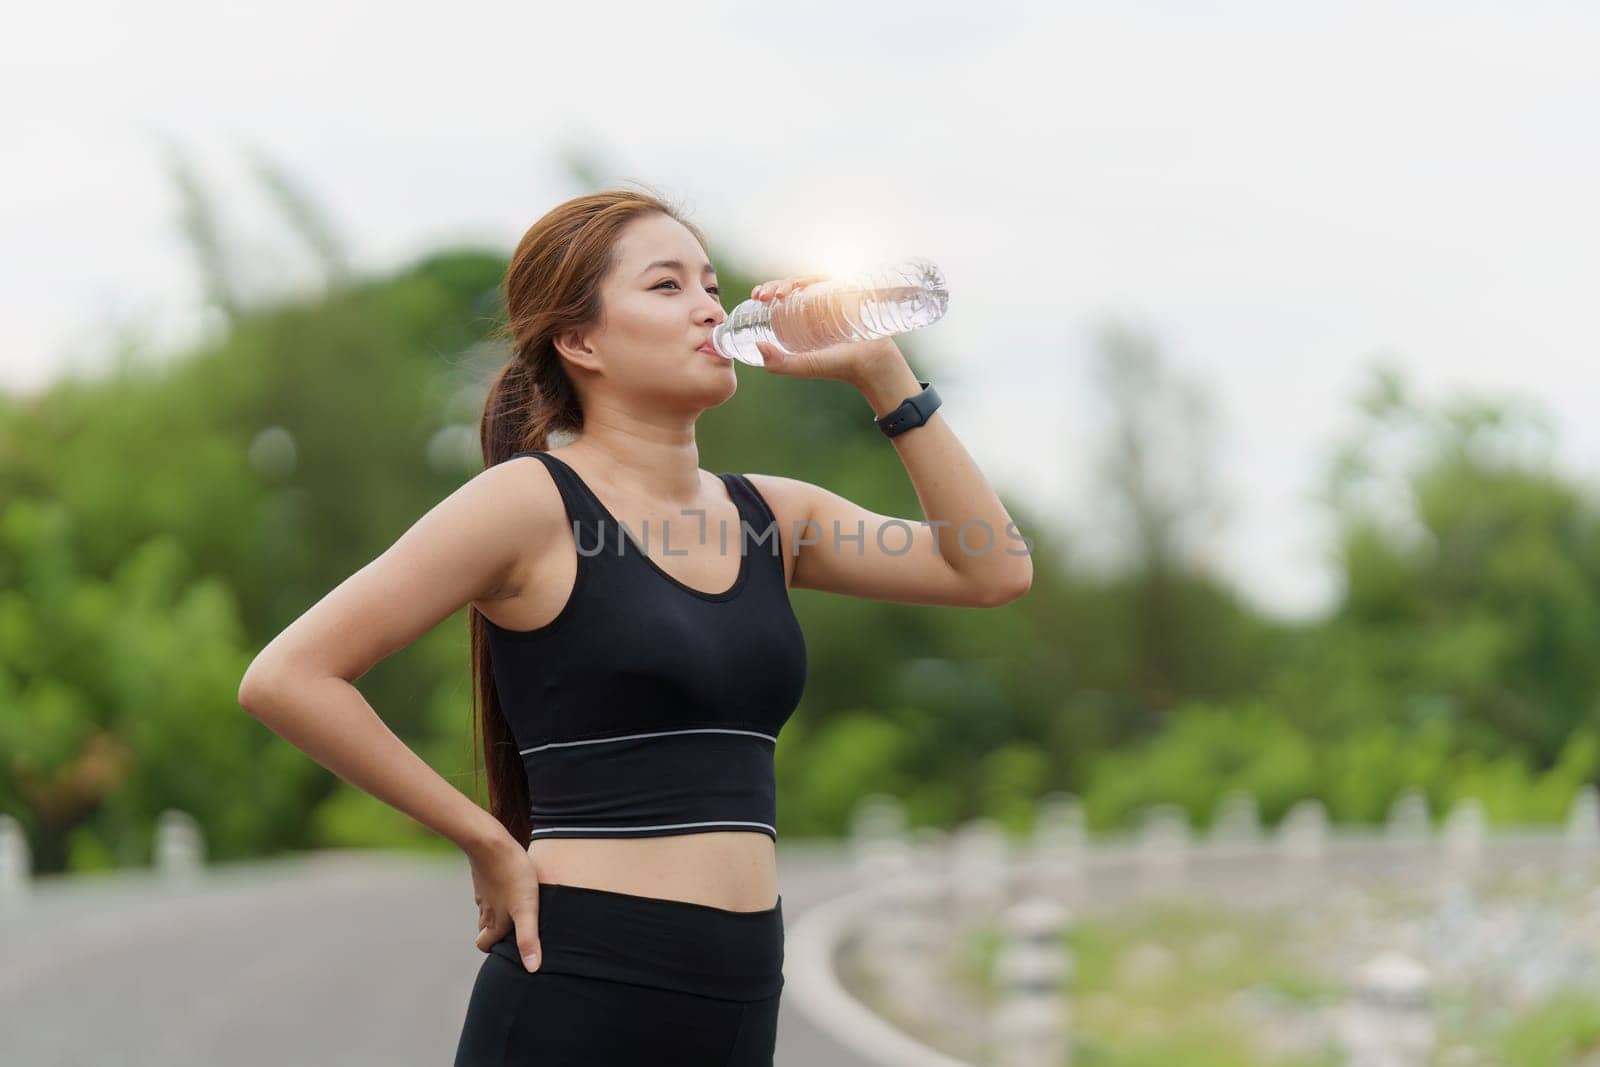 Woman drinking water after sport activities. Female exercising at outdoor park by itchaznong